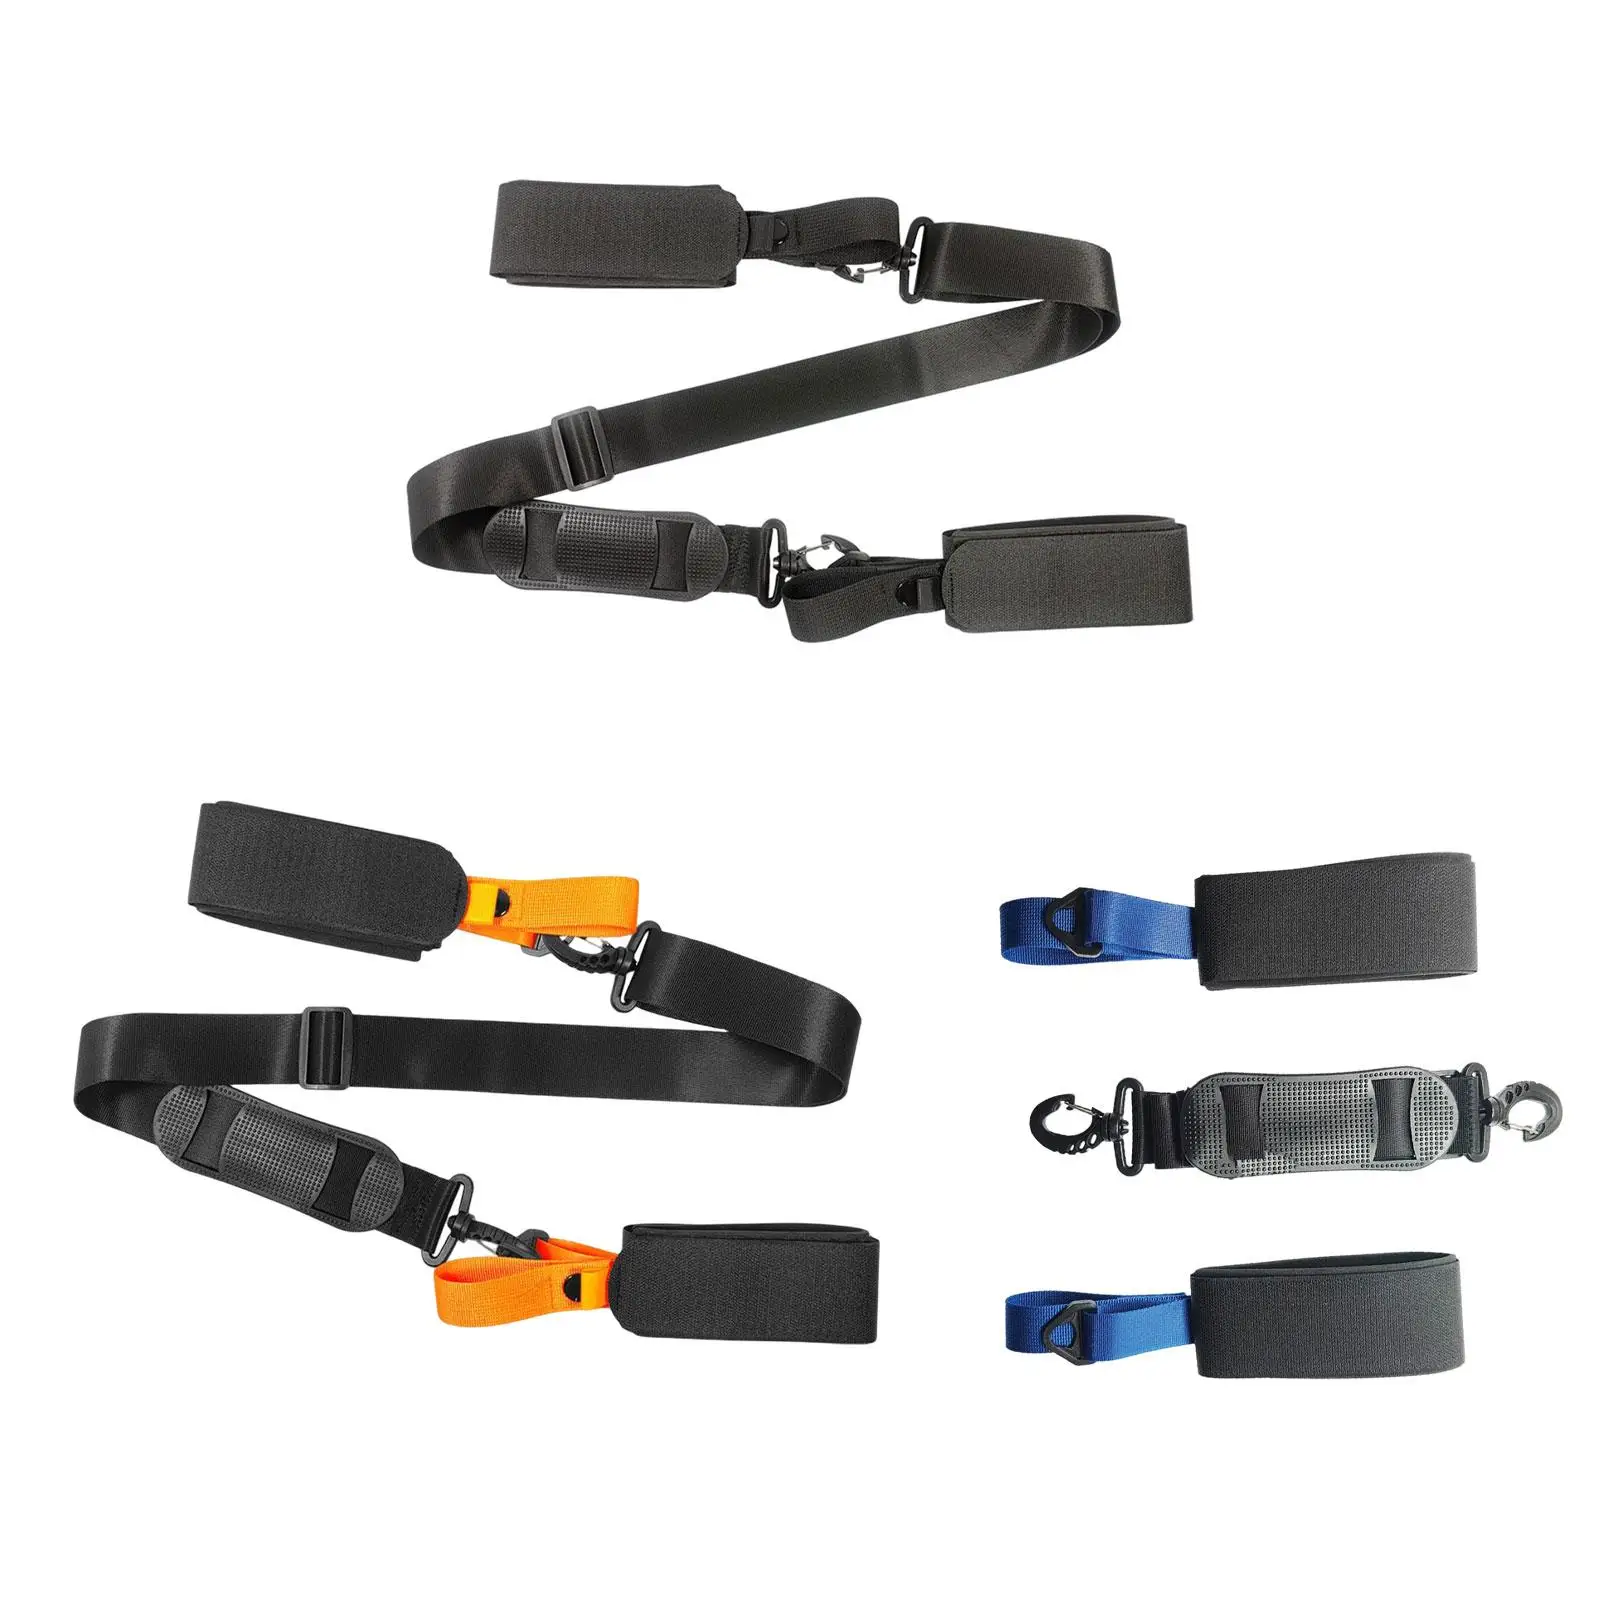 Ski Carry Strap Belt Tool Anti Scratches Equipments for Families